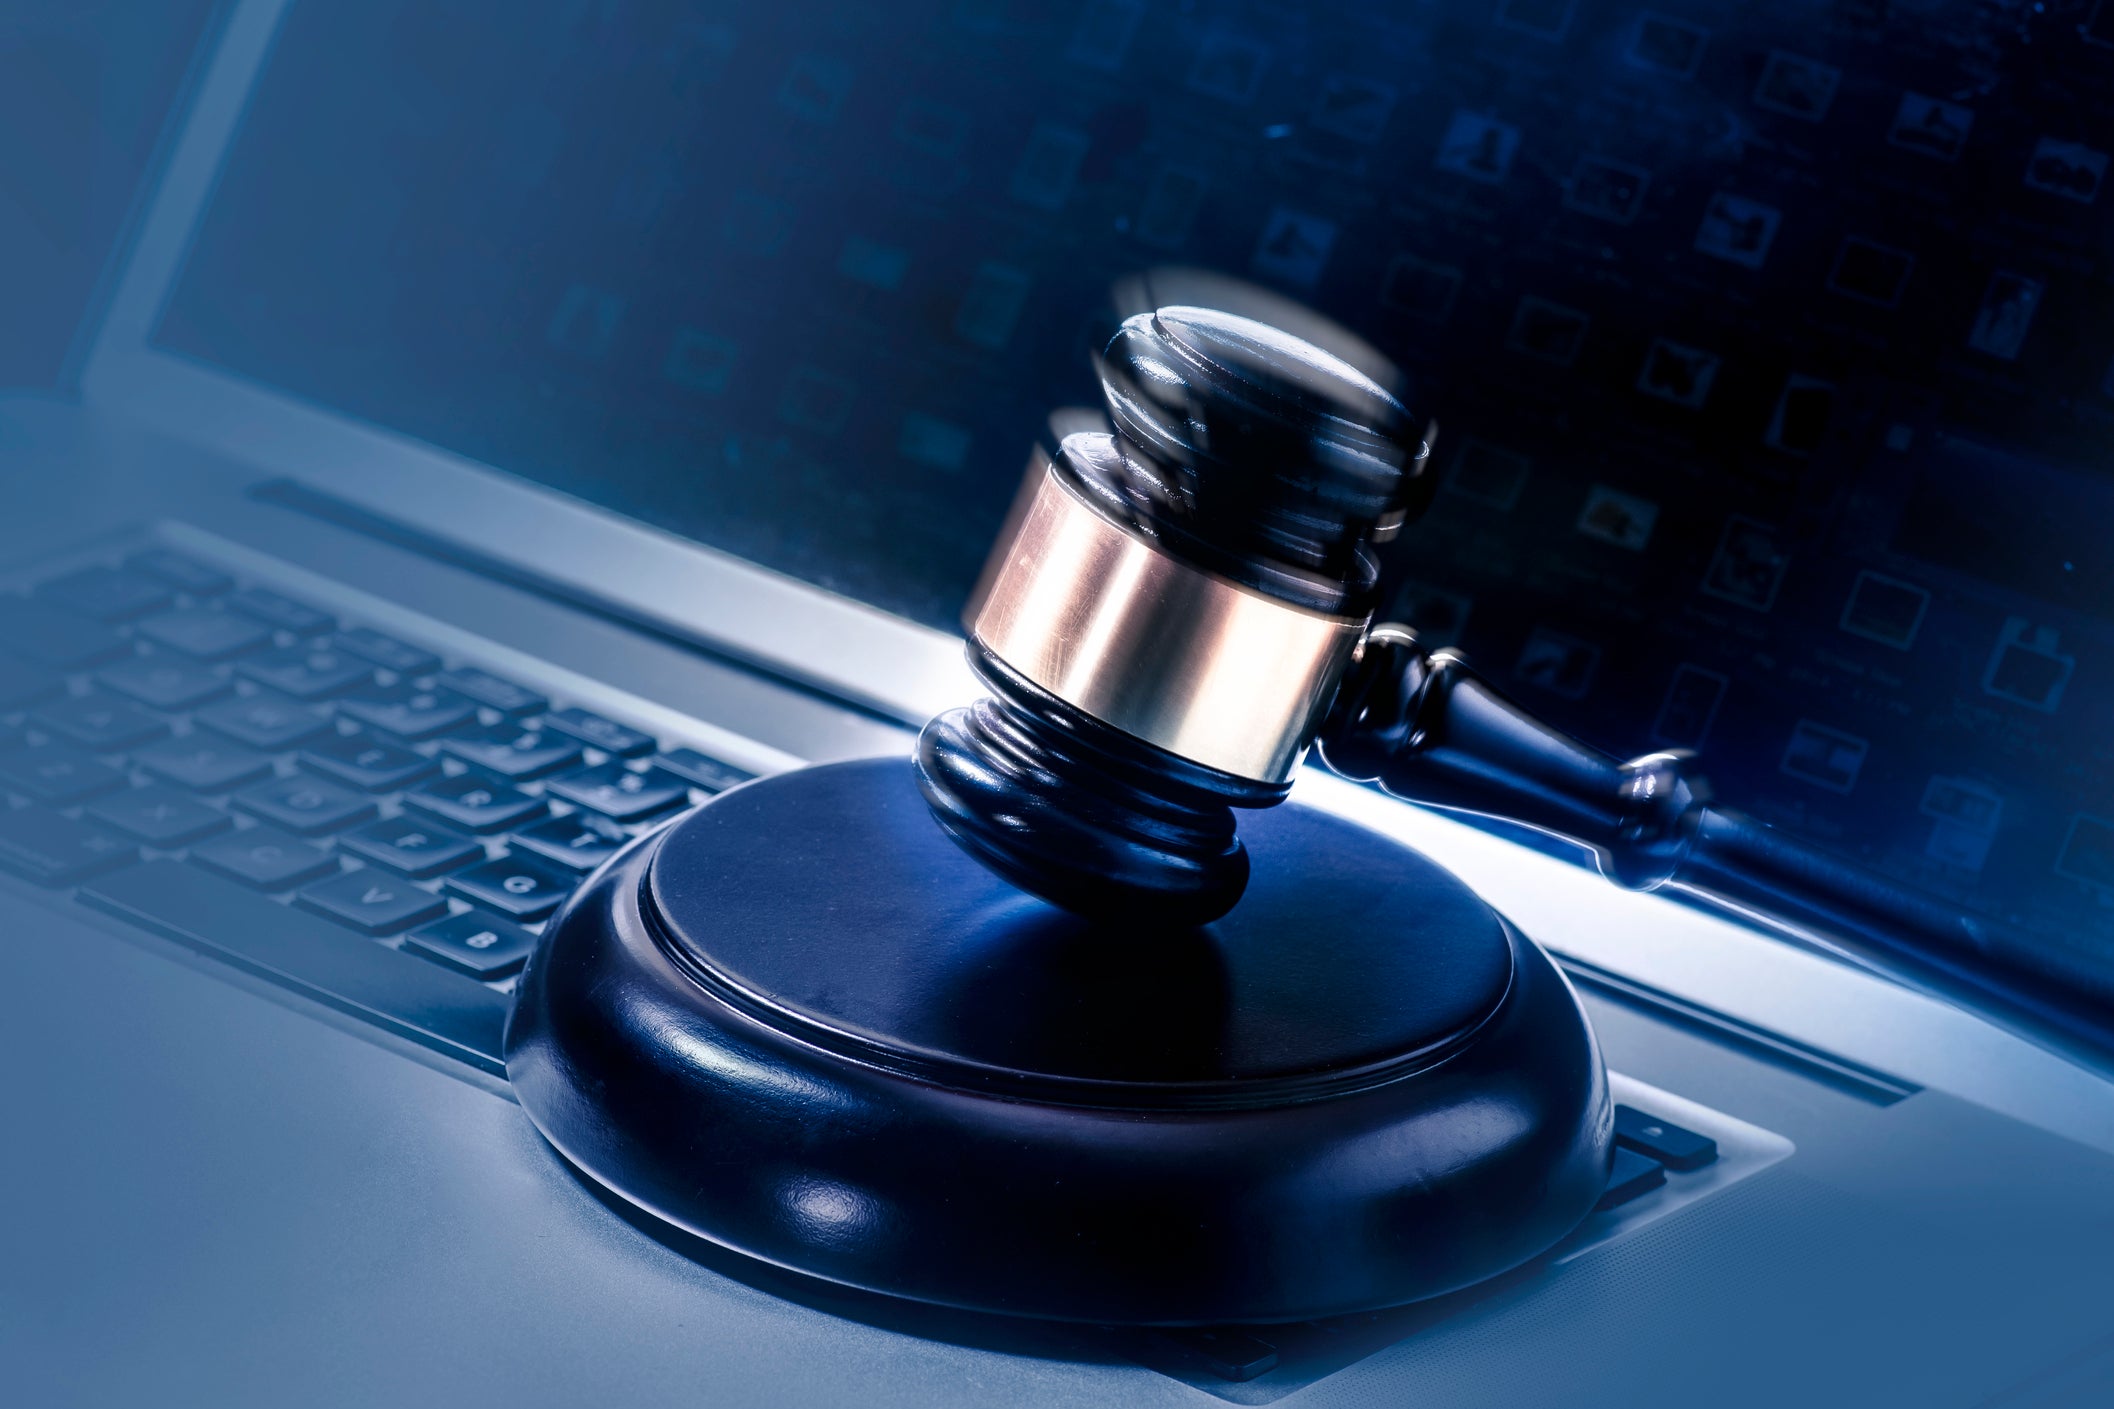 A gavel on a computer. South Africa and Egypt are both considering new internet censorship laws.